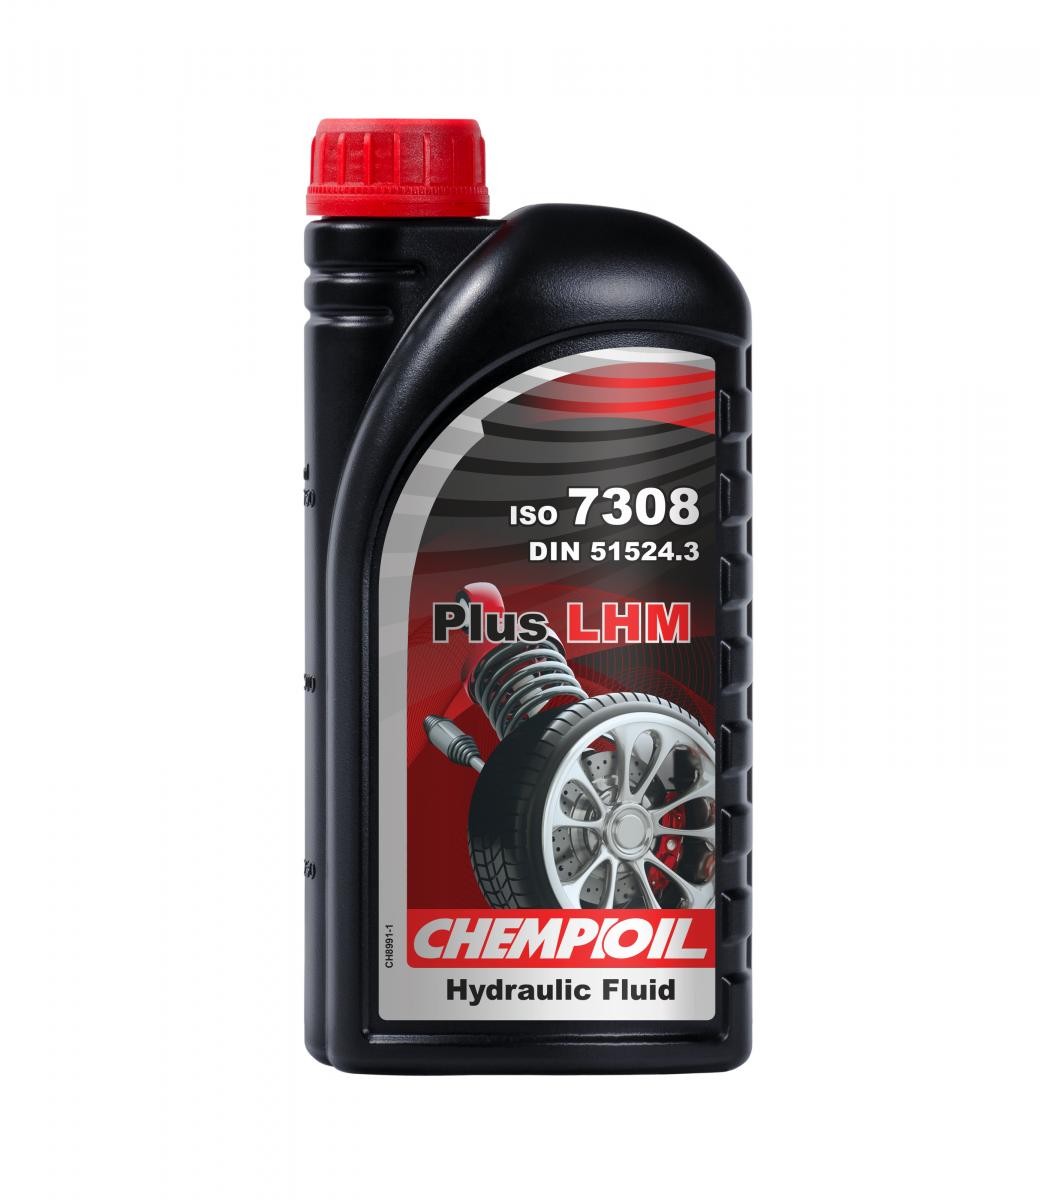 Mazda Power steering fluid CHEMPIOIL CH8991-1 at a good price